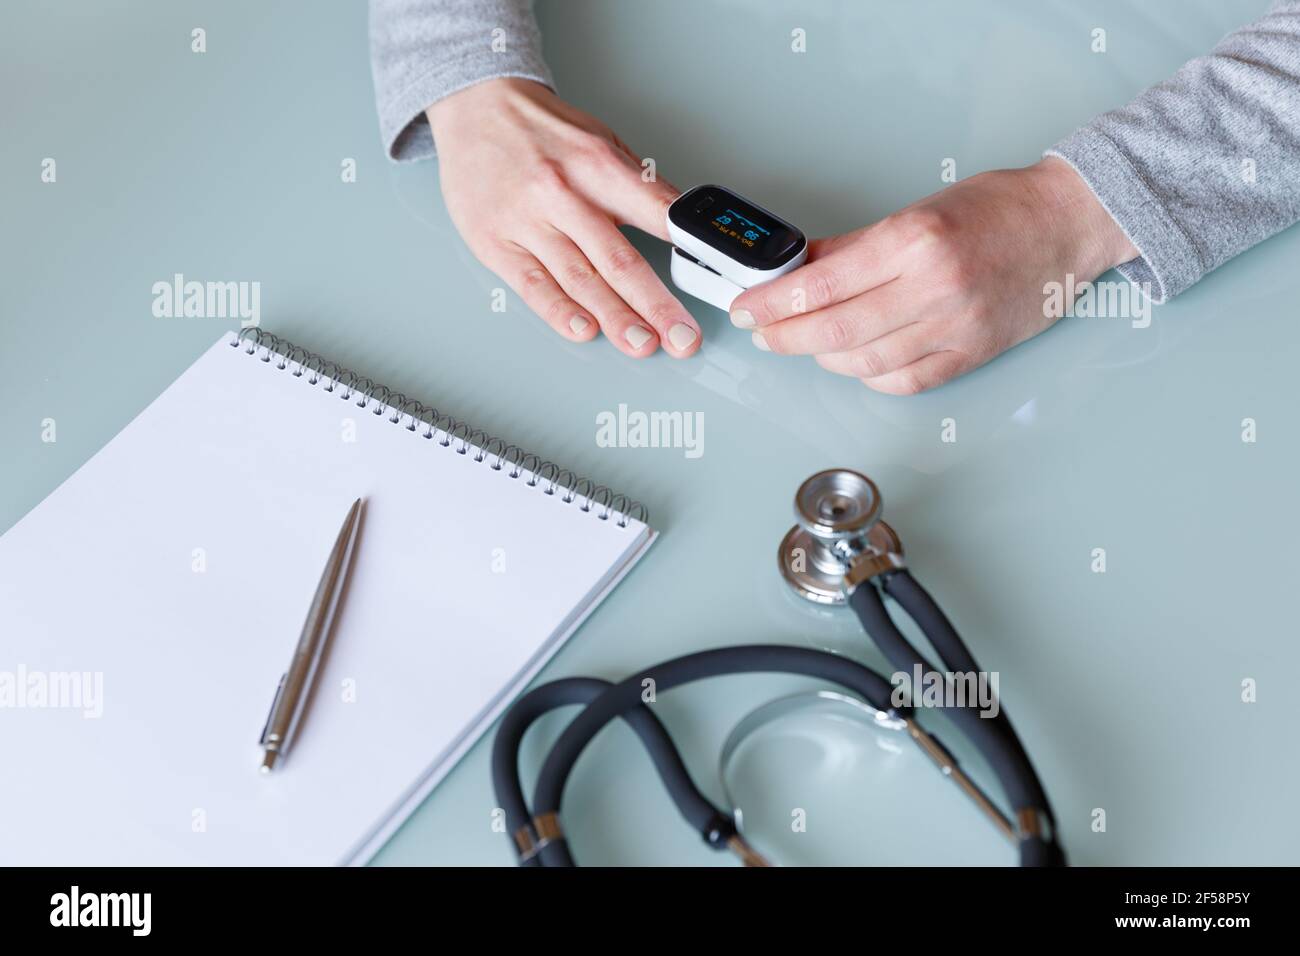 Female patient hand measuring oxygen saturation and pulse using portable oximeter. Health care concept Stock Photo